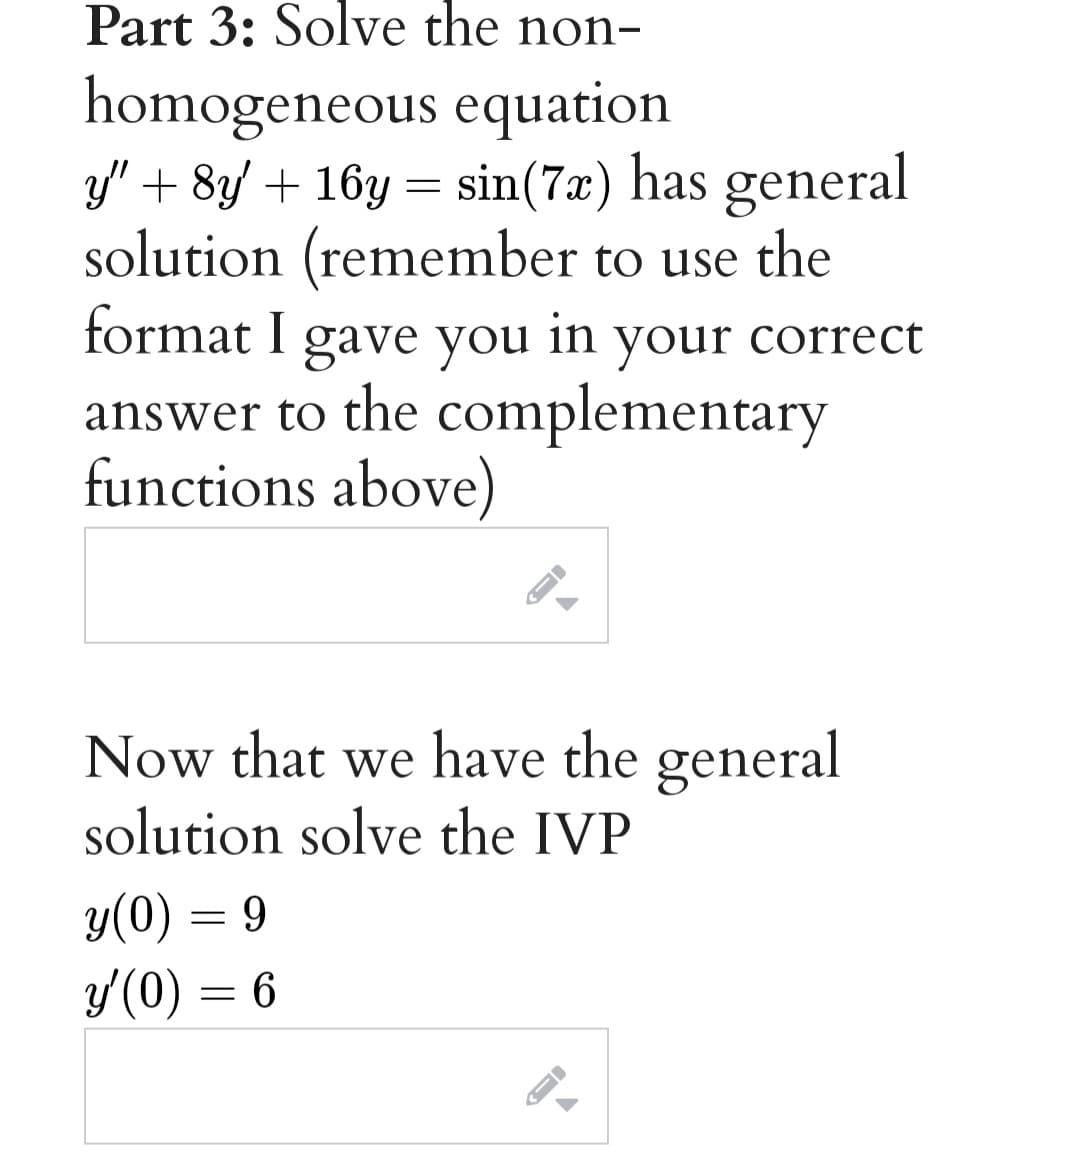 Part 3: Solve the non-
homogeneous equation
3/" + 8y + 16y = sin(7x) has general
solution (remember to use the
format I gave you
your
your correct
answer to the complementary
functions above)
Now that we have the general
solution solve the IVP
y(0) = 9
y(0) = 6
